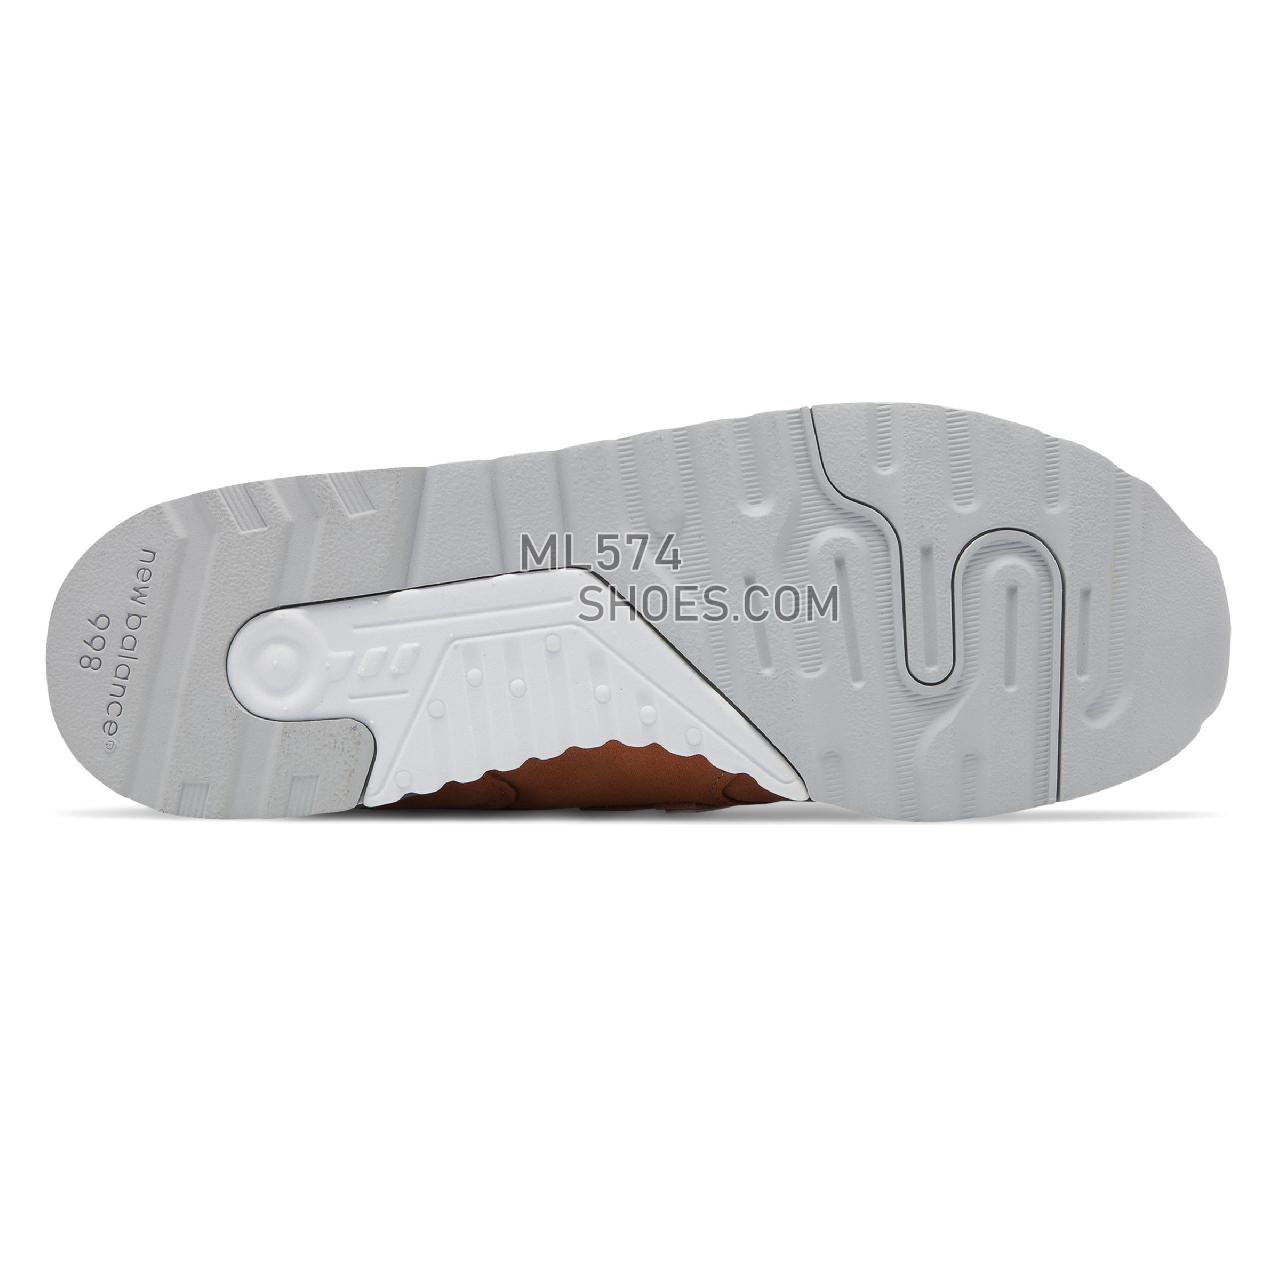 New Balance Made in US 998 - Men's 998 Made in US Classic M998-EPL - Brown Sugar with White - M998TCC